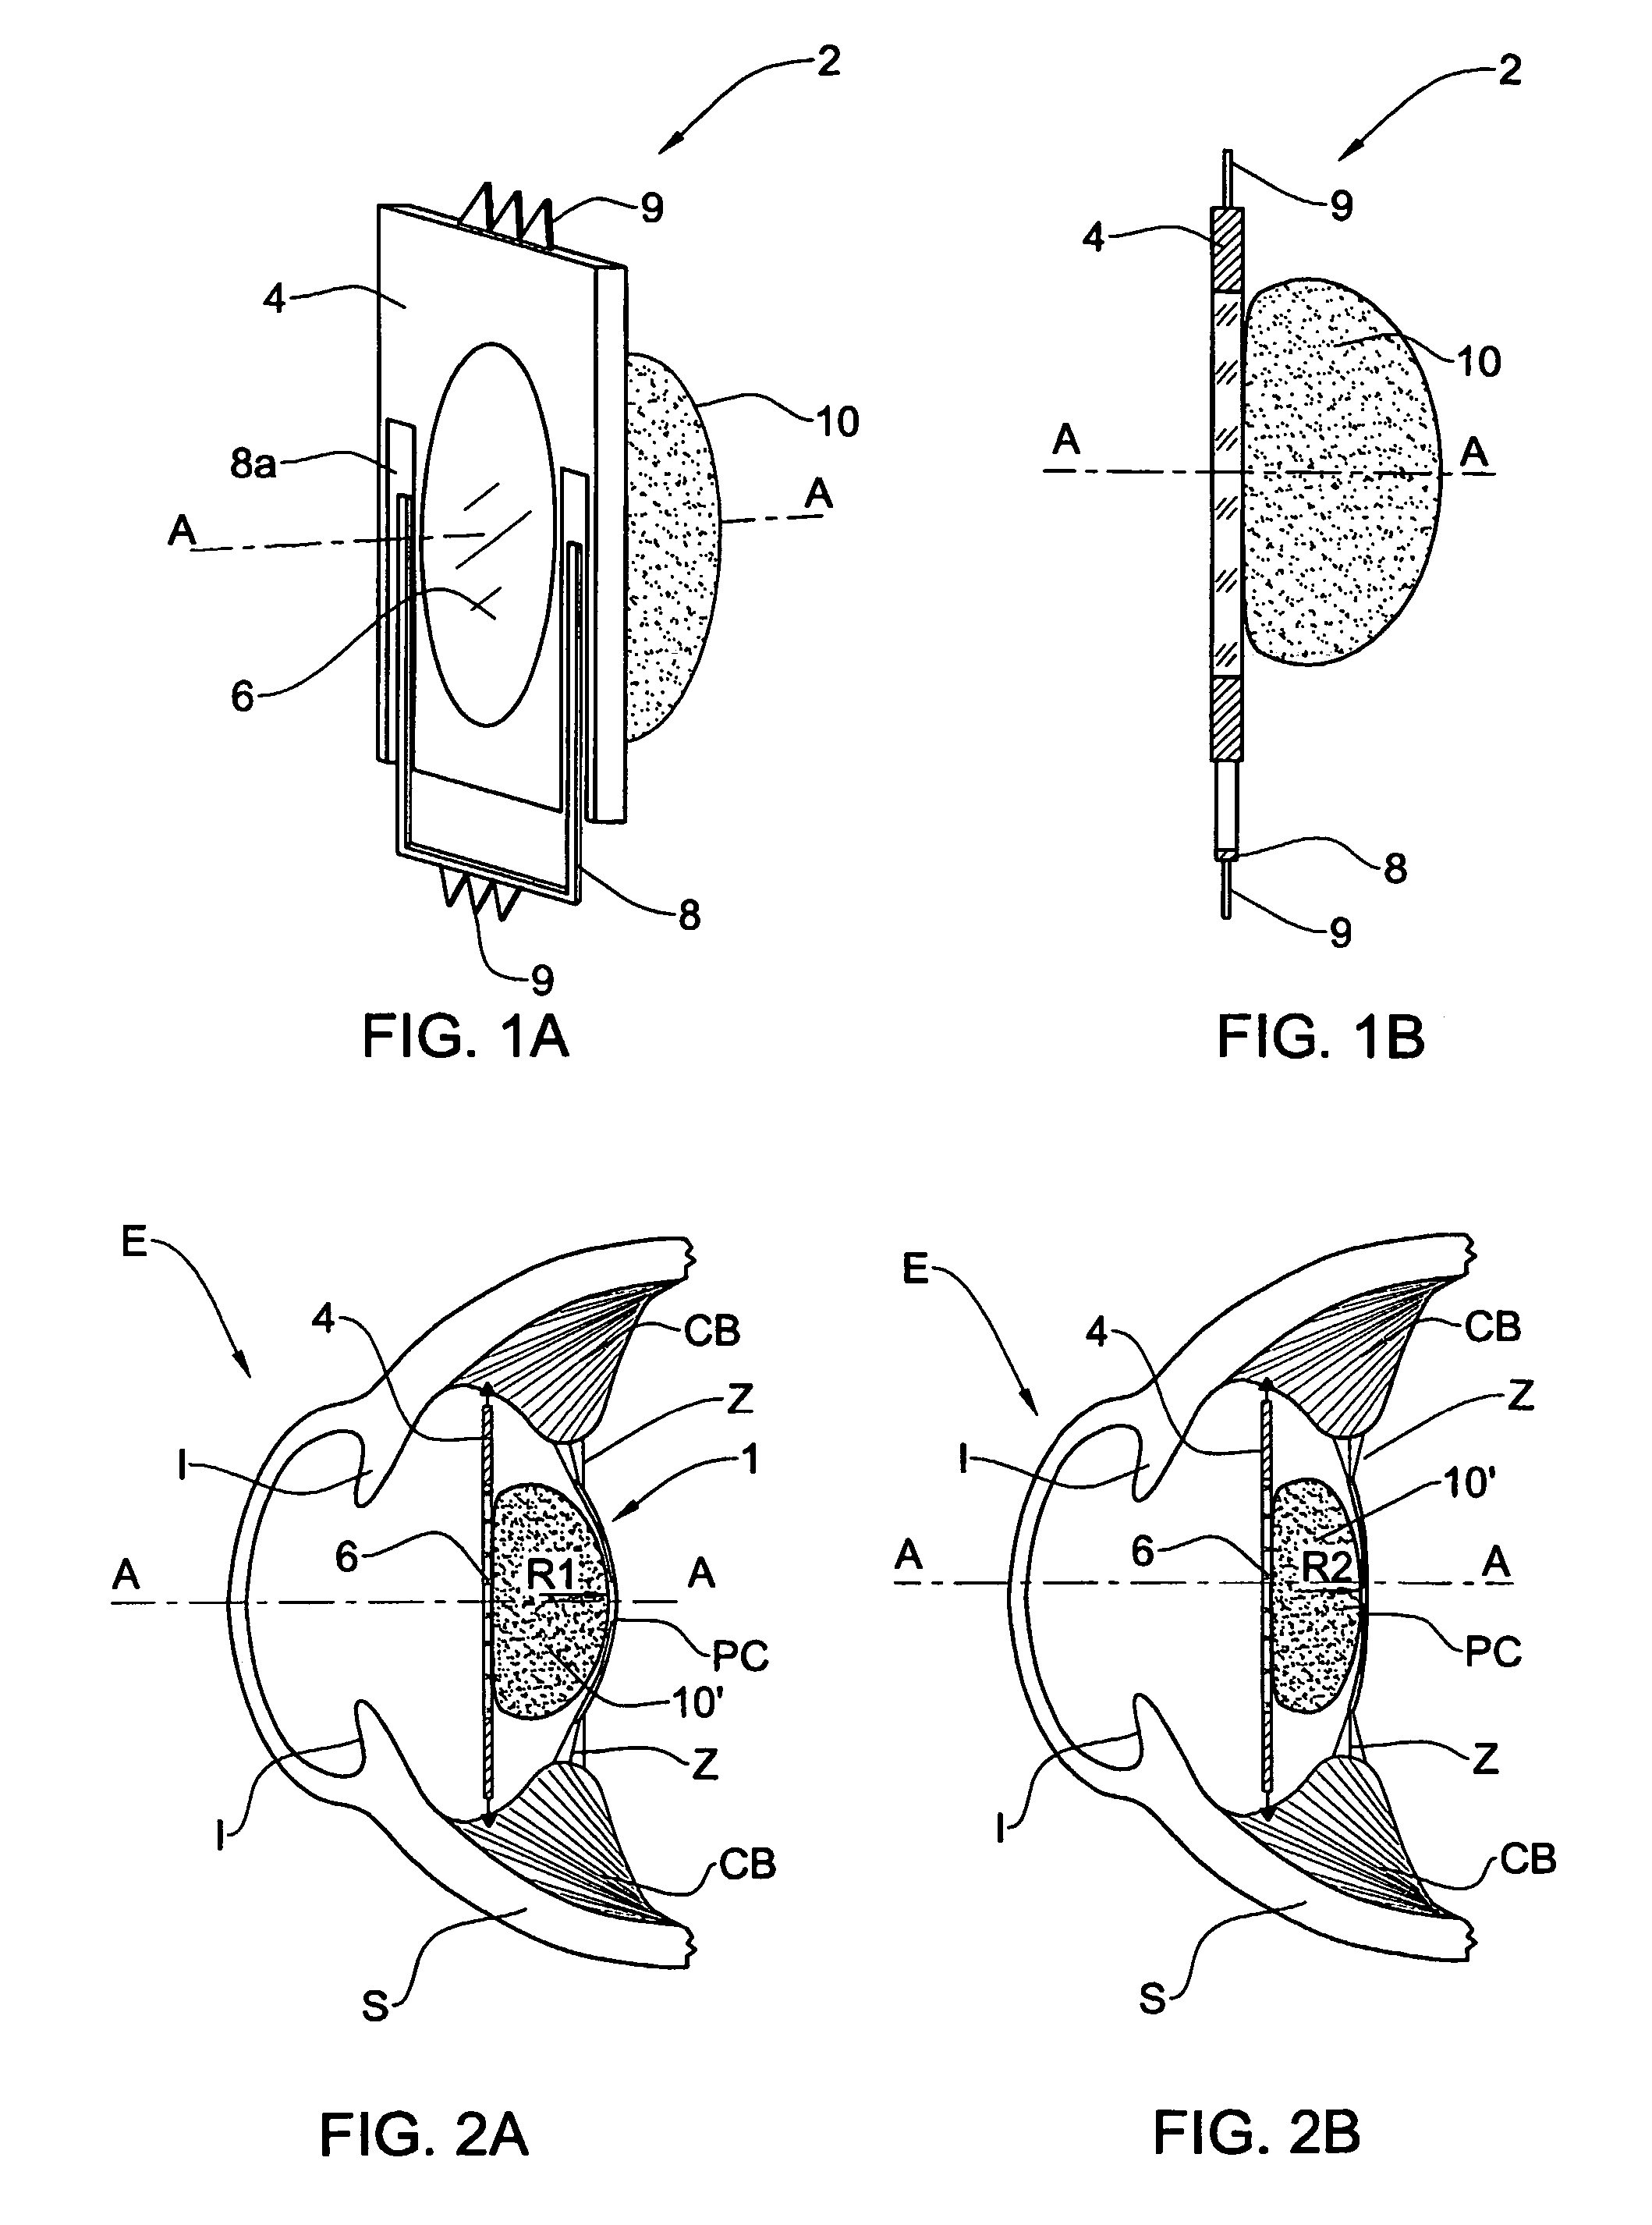 Accommodating lens assembly